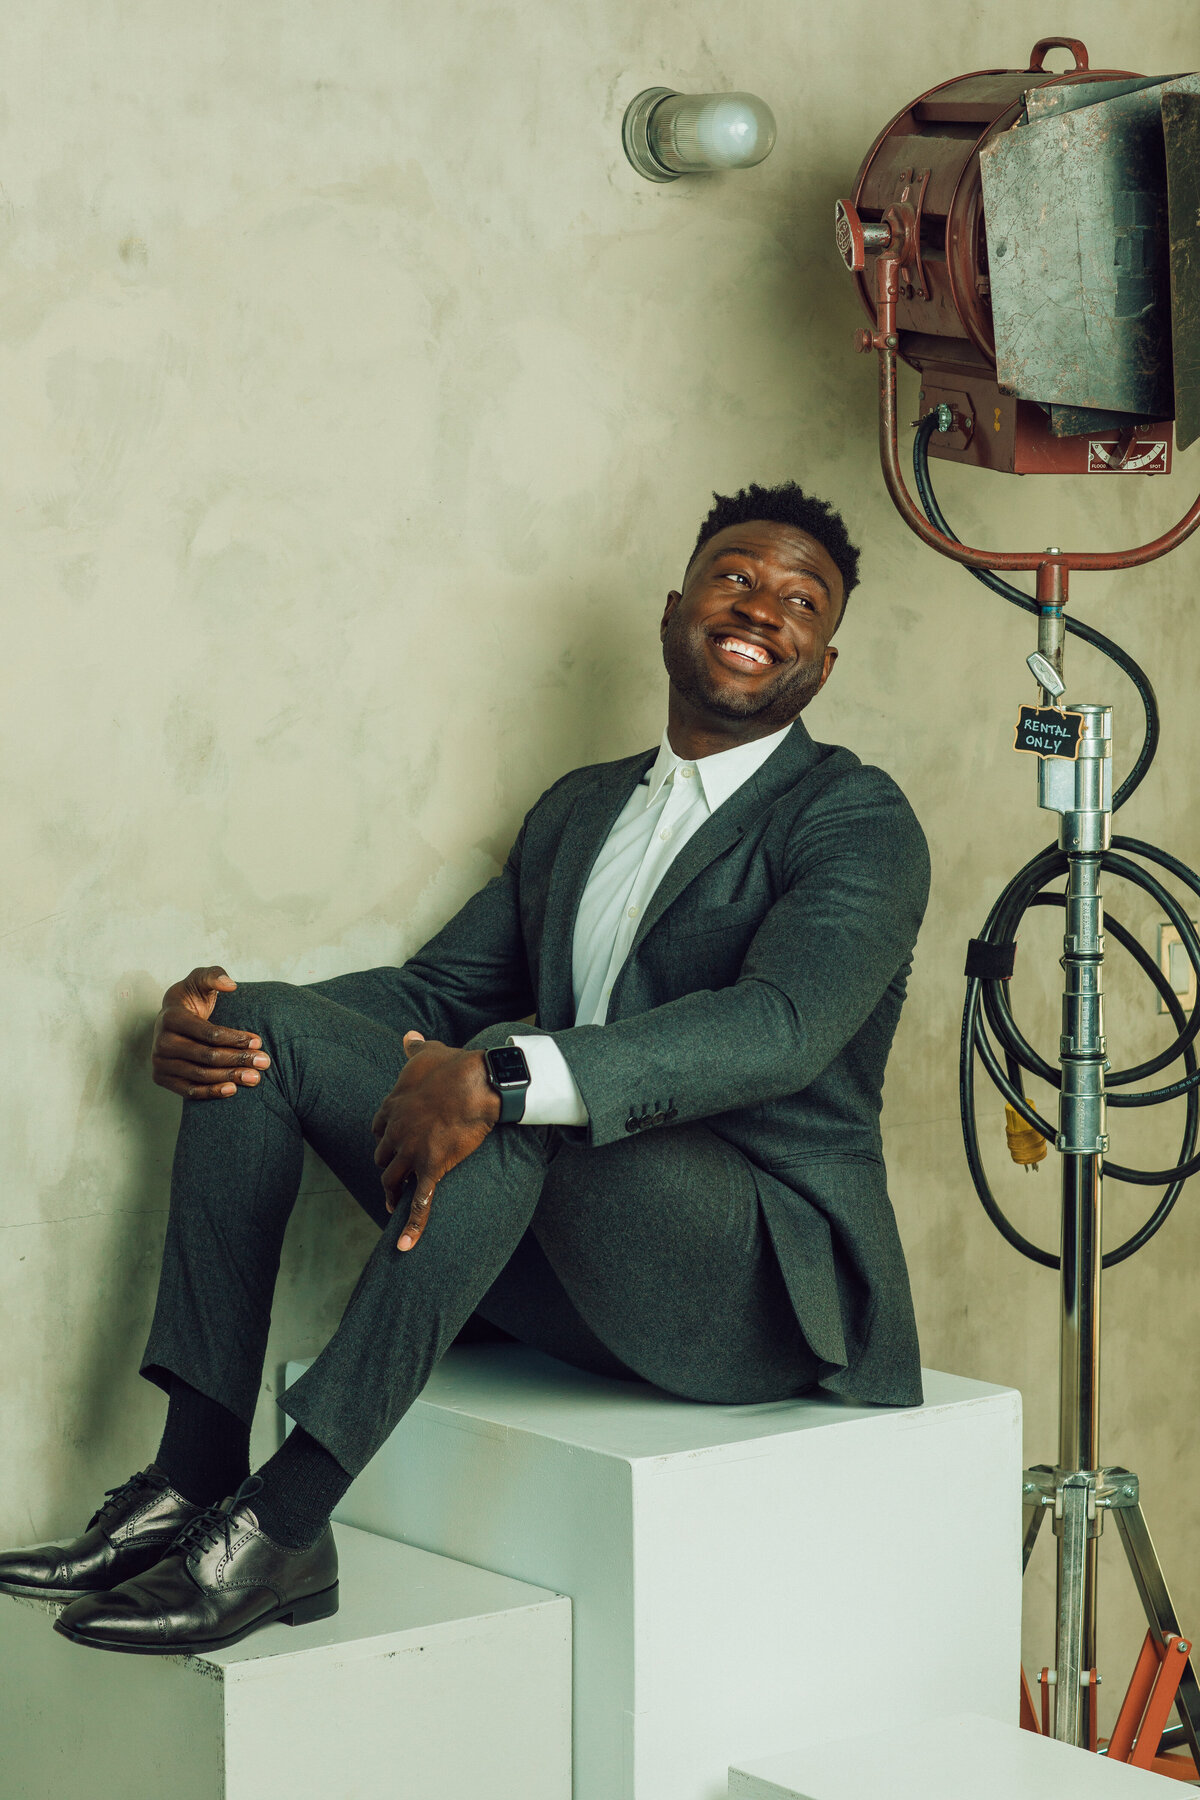 Portrait Photo Of Young Black Man In Gray Suit Seated In a White Box Los Angeles